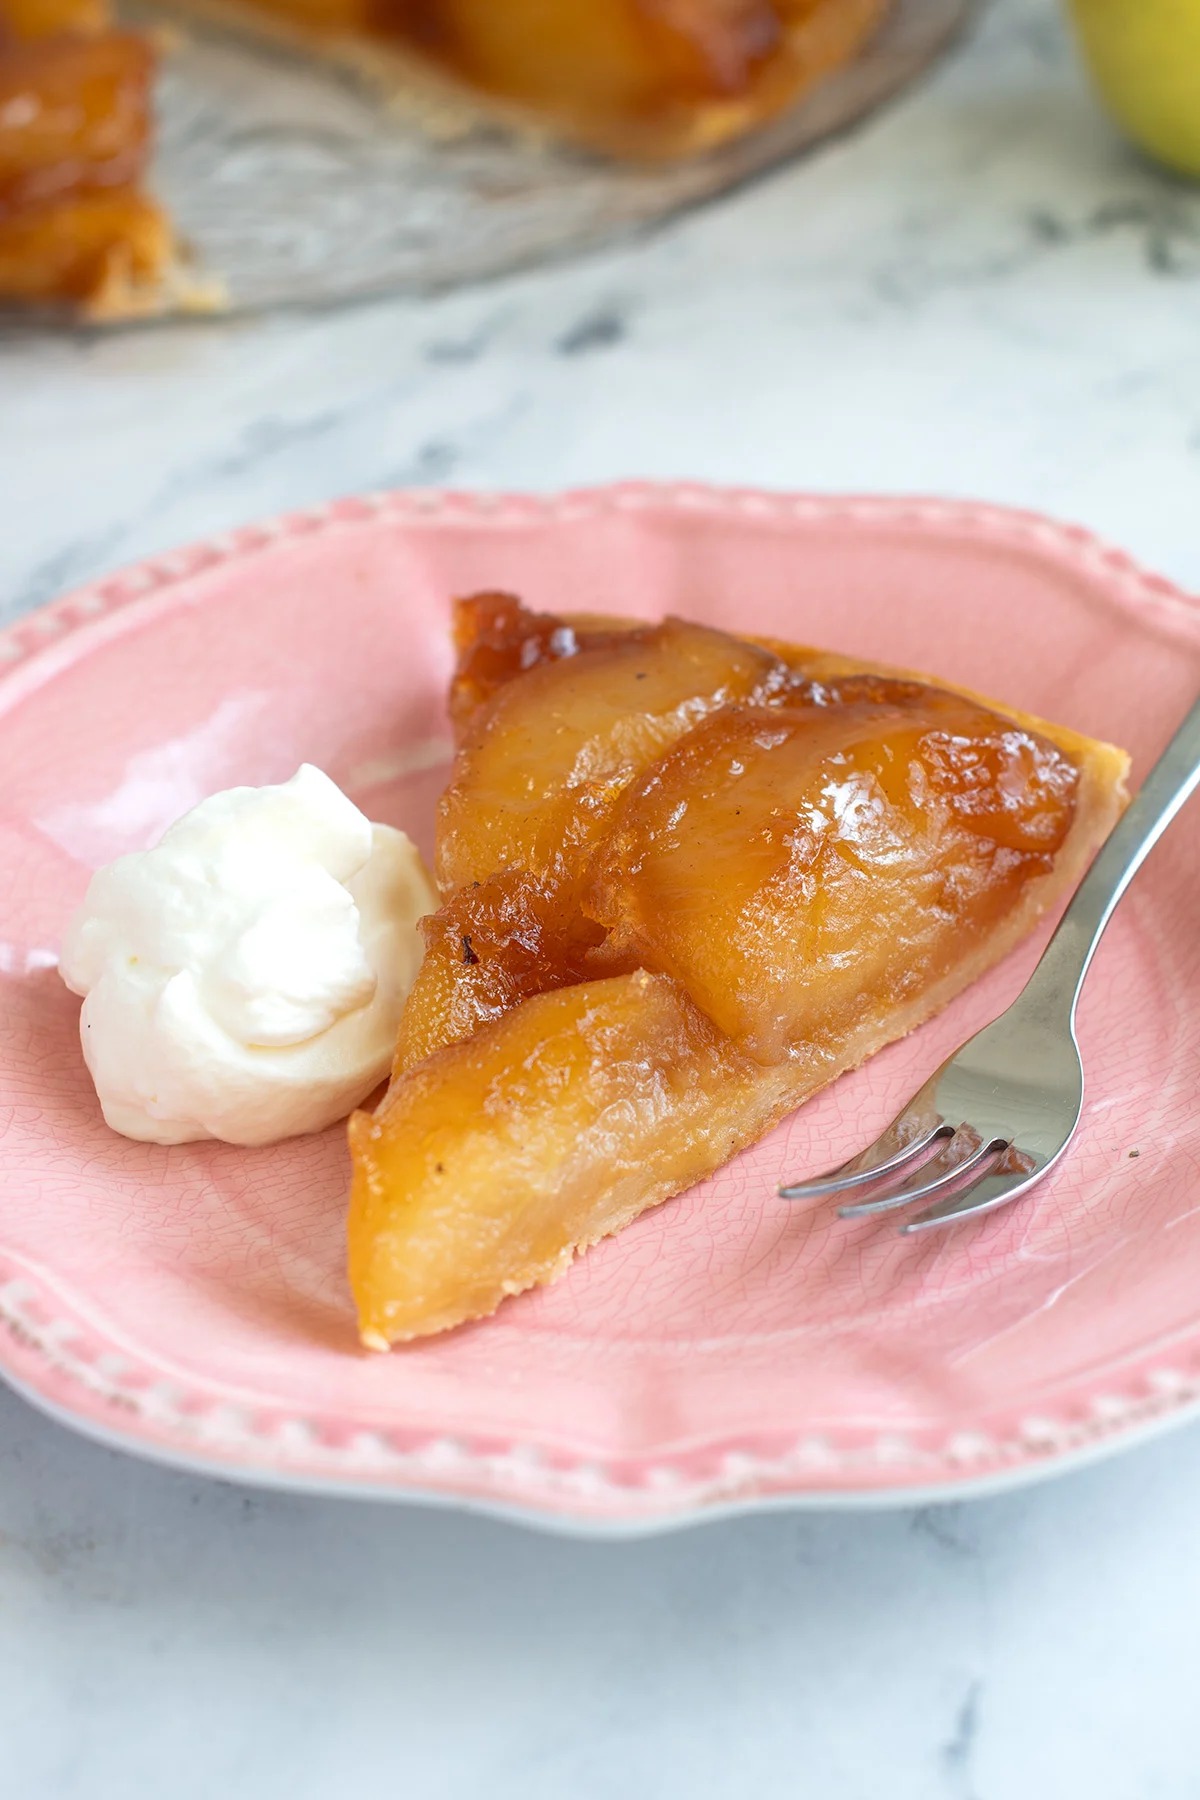 a slice of tarte tatin on a pink plate with a fork and a dollop of cream.